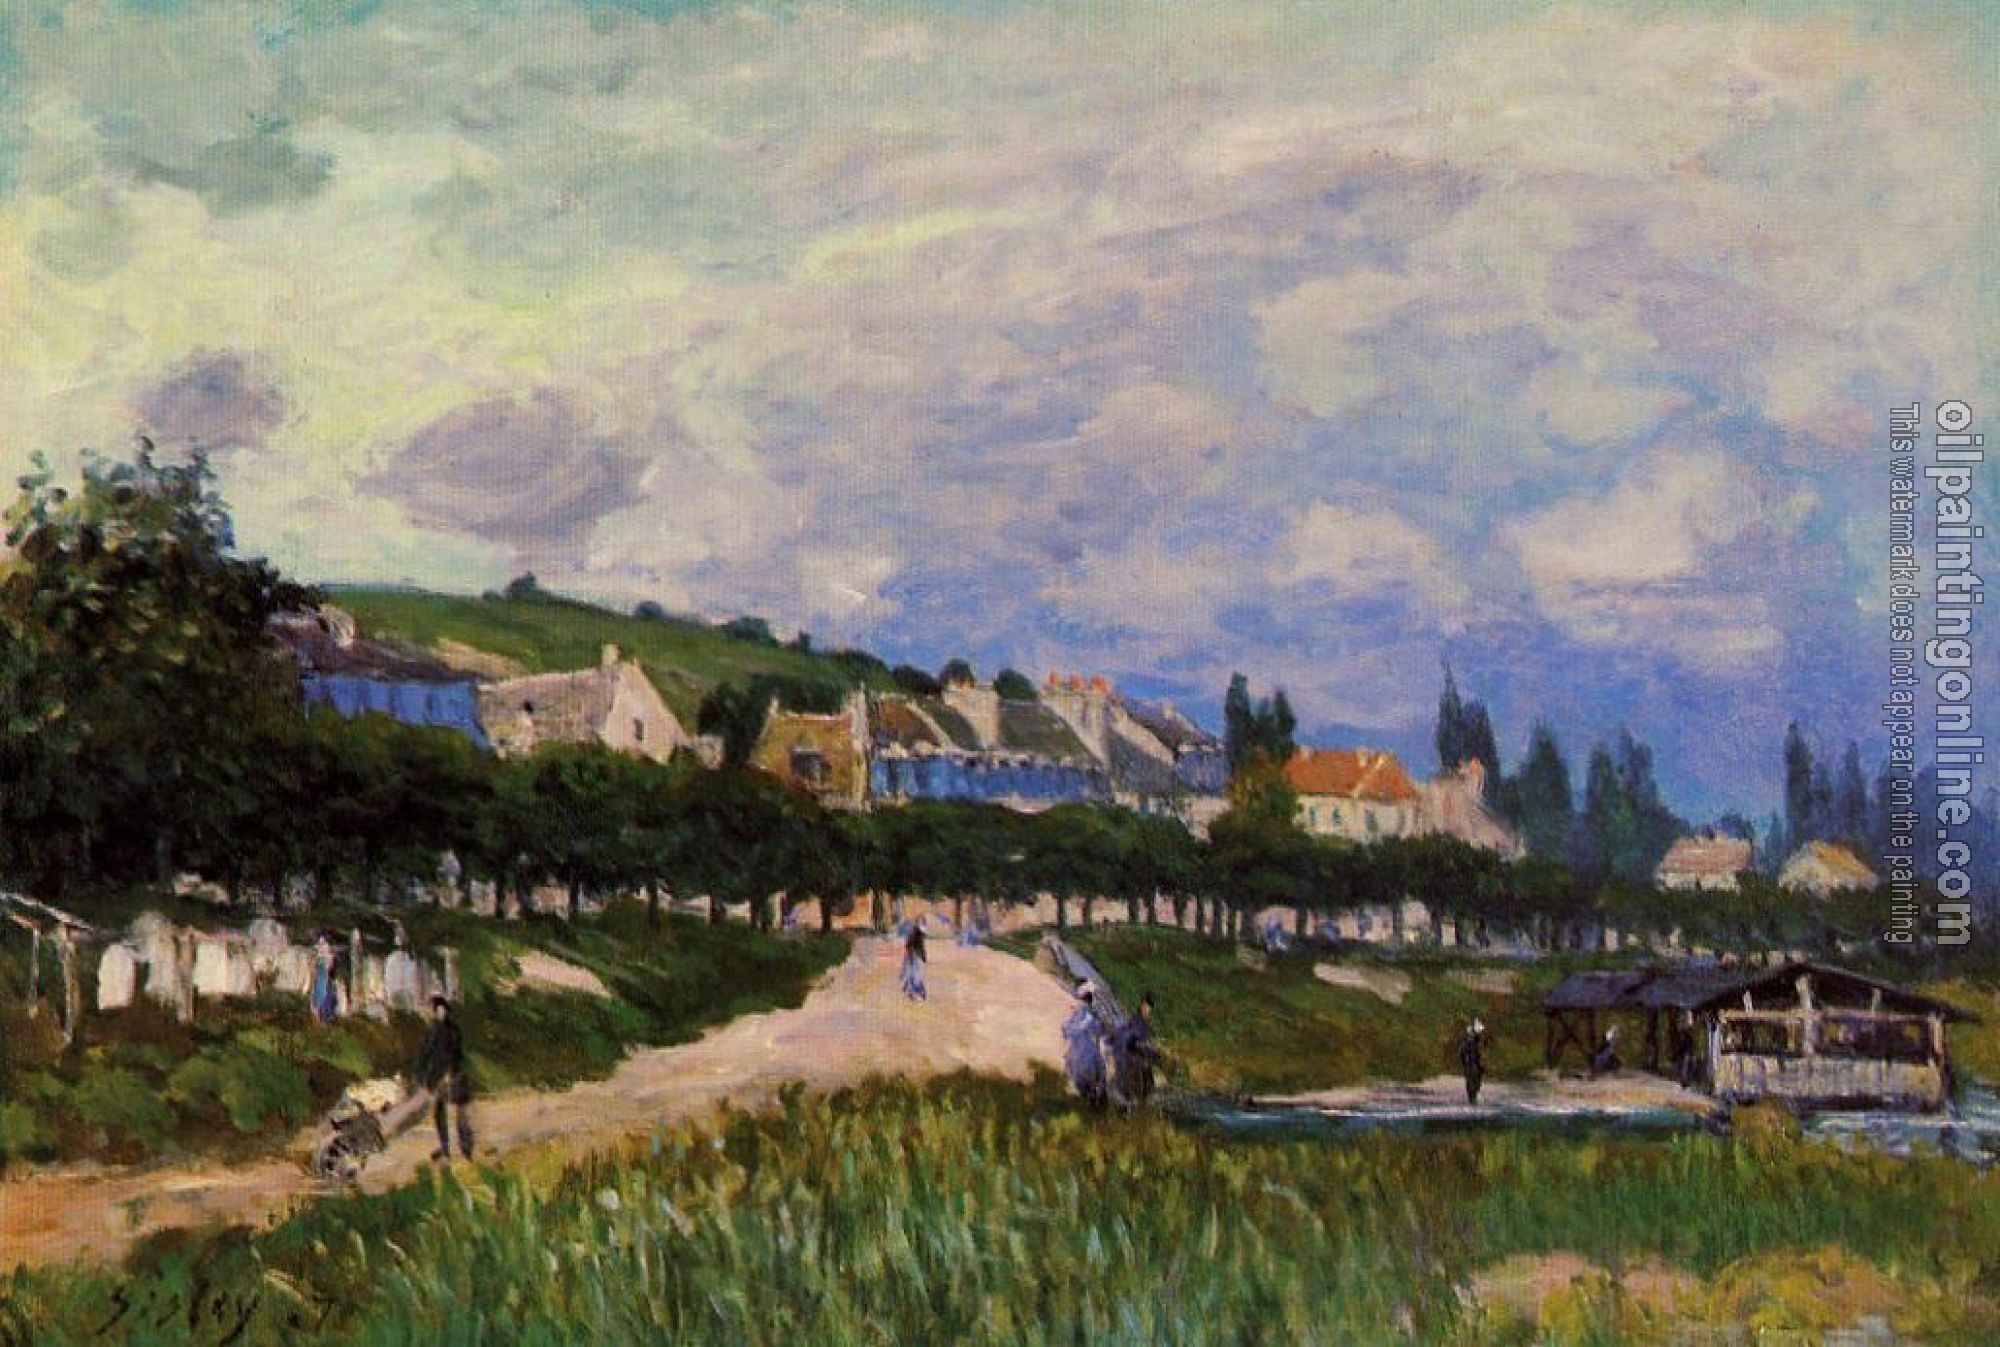 Sisley, Alfred - The Laundry